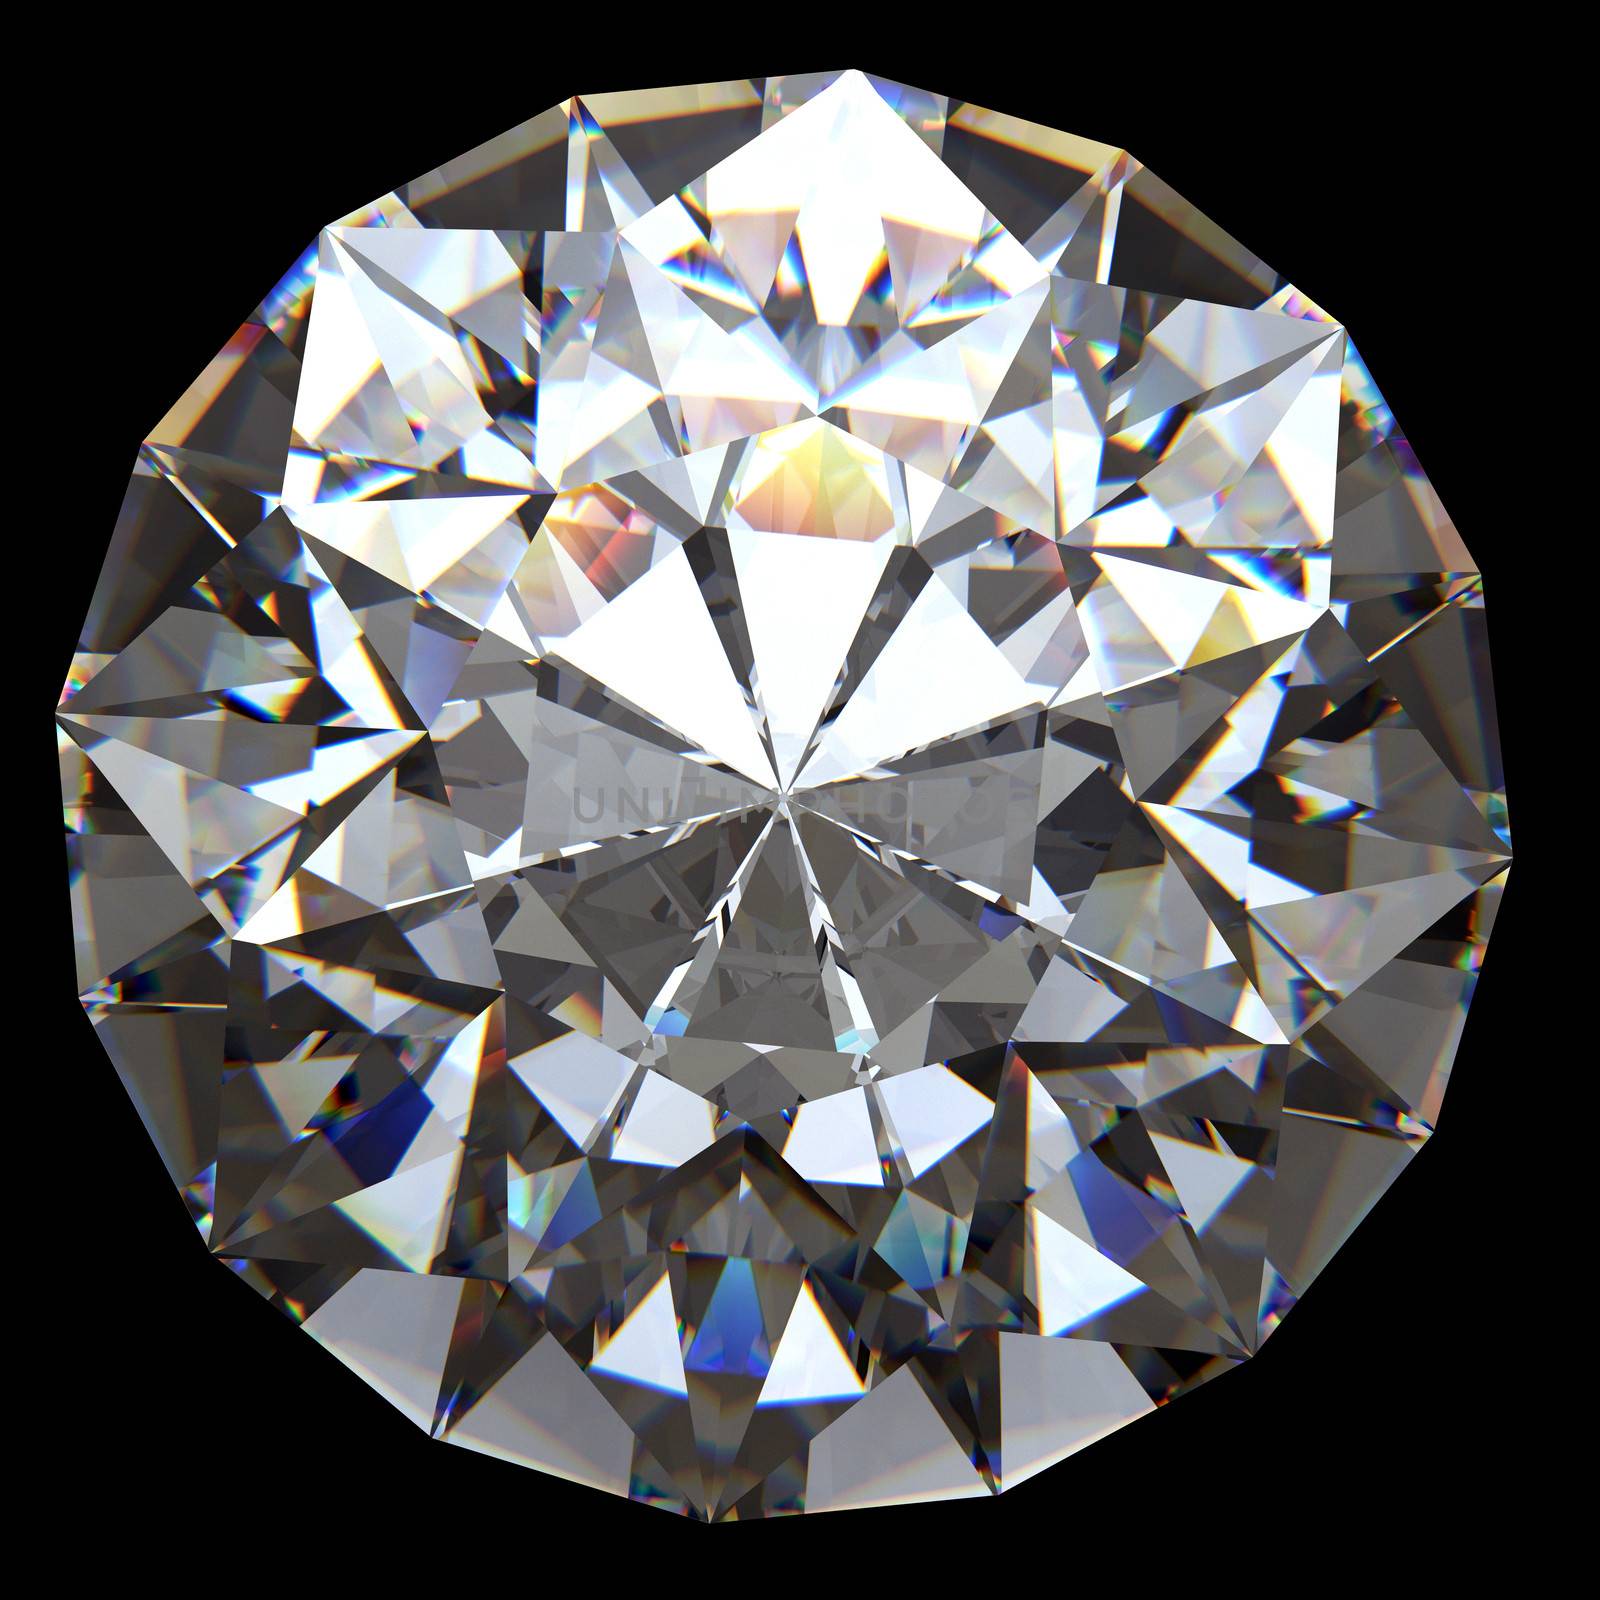 Shiny diamond on white background with clipping path